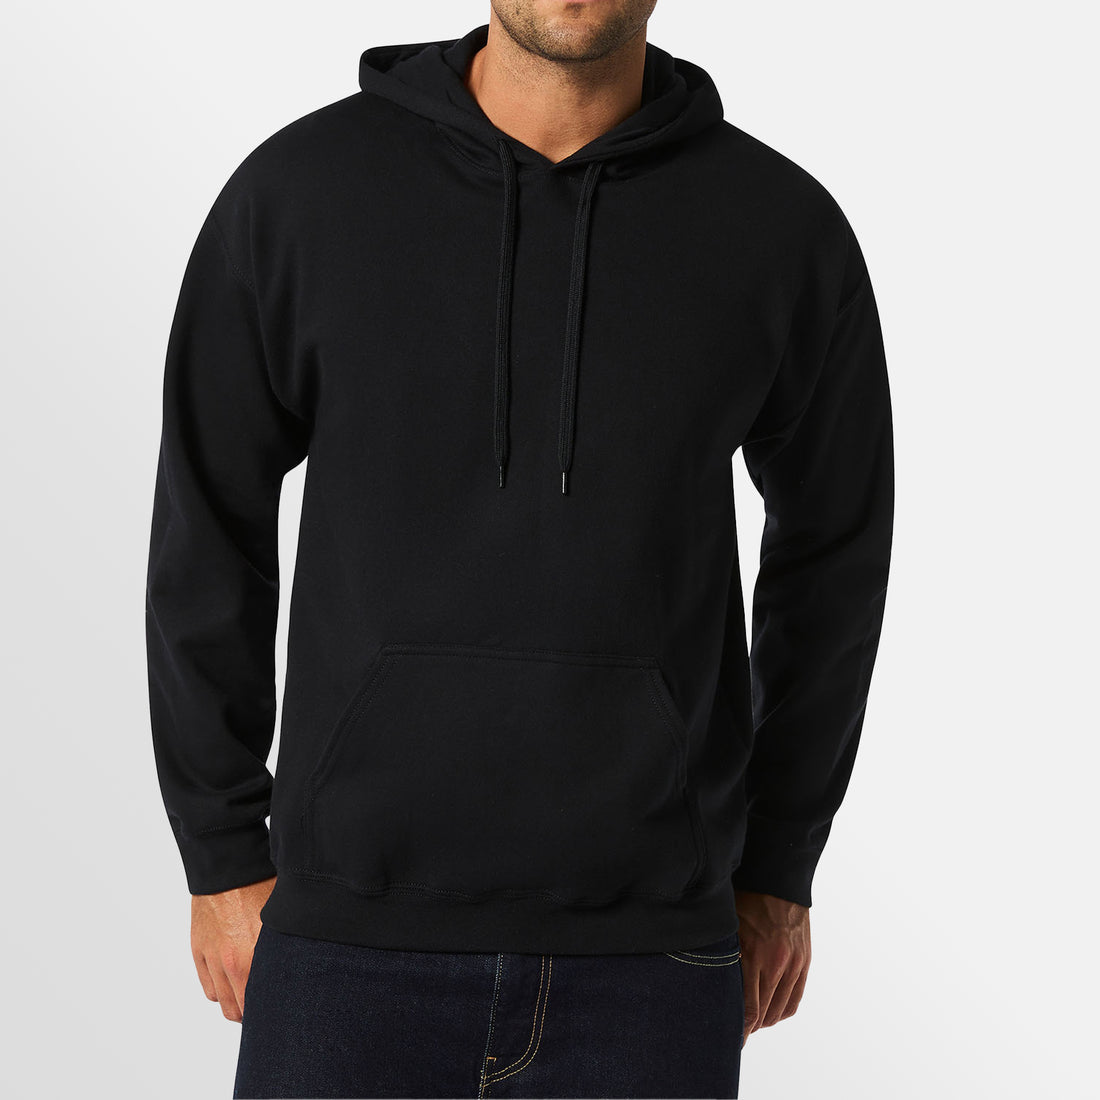 Softstyle Hoodie – On Request